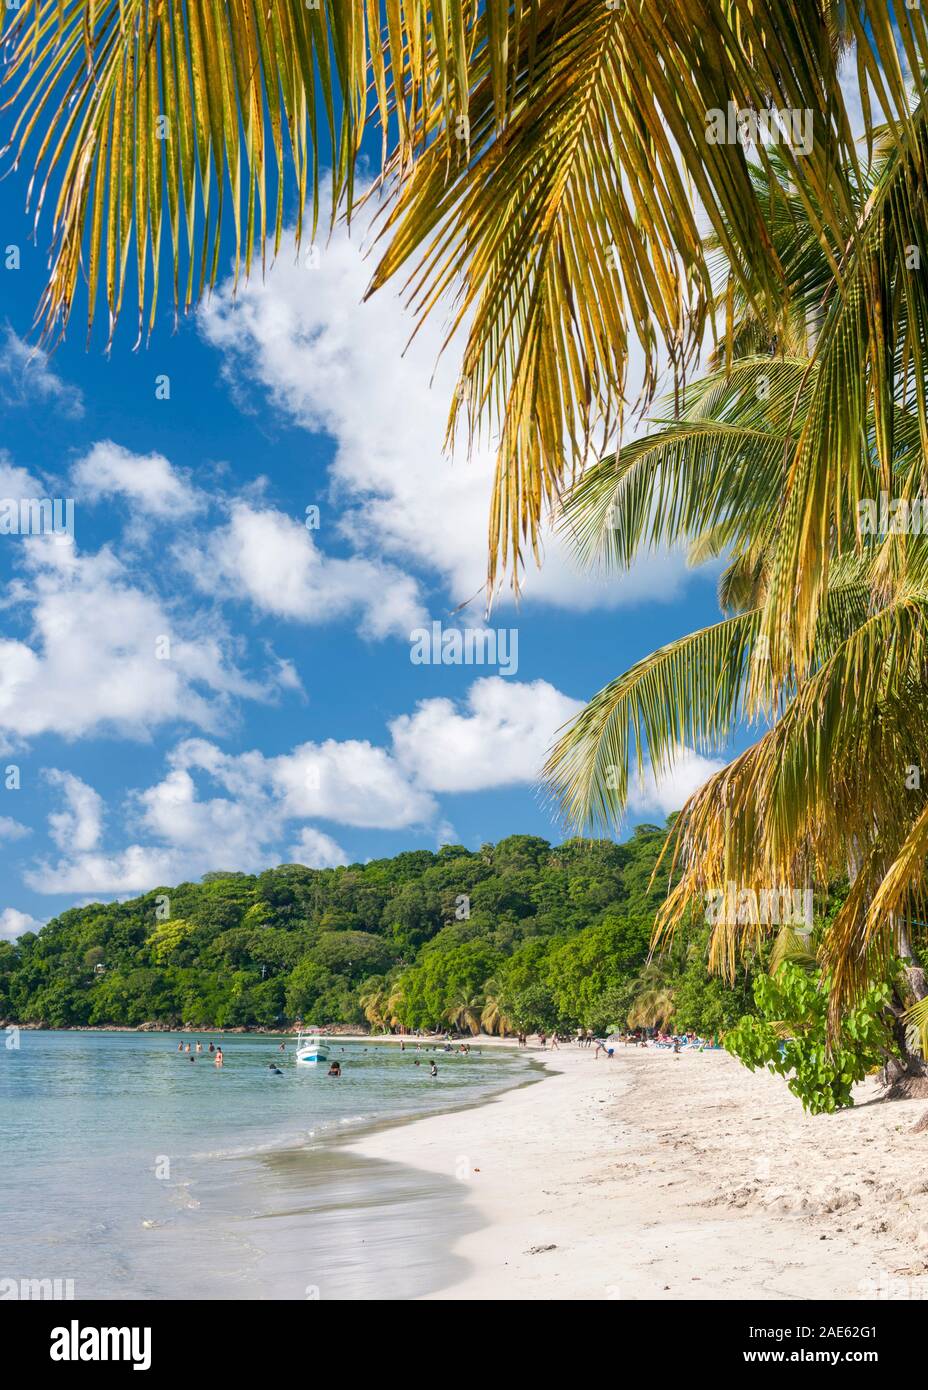 The beach at Southwest Bay on Providencia island, Colombia. Stock Photo